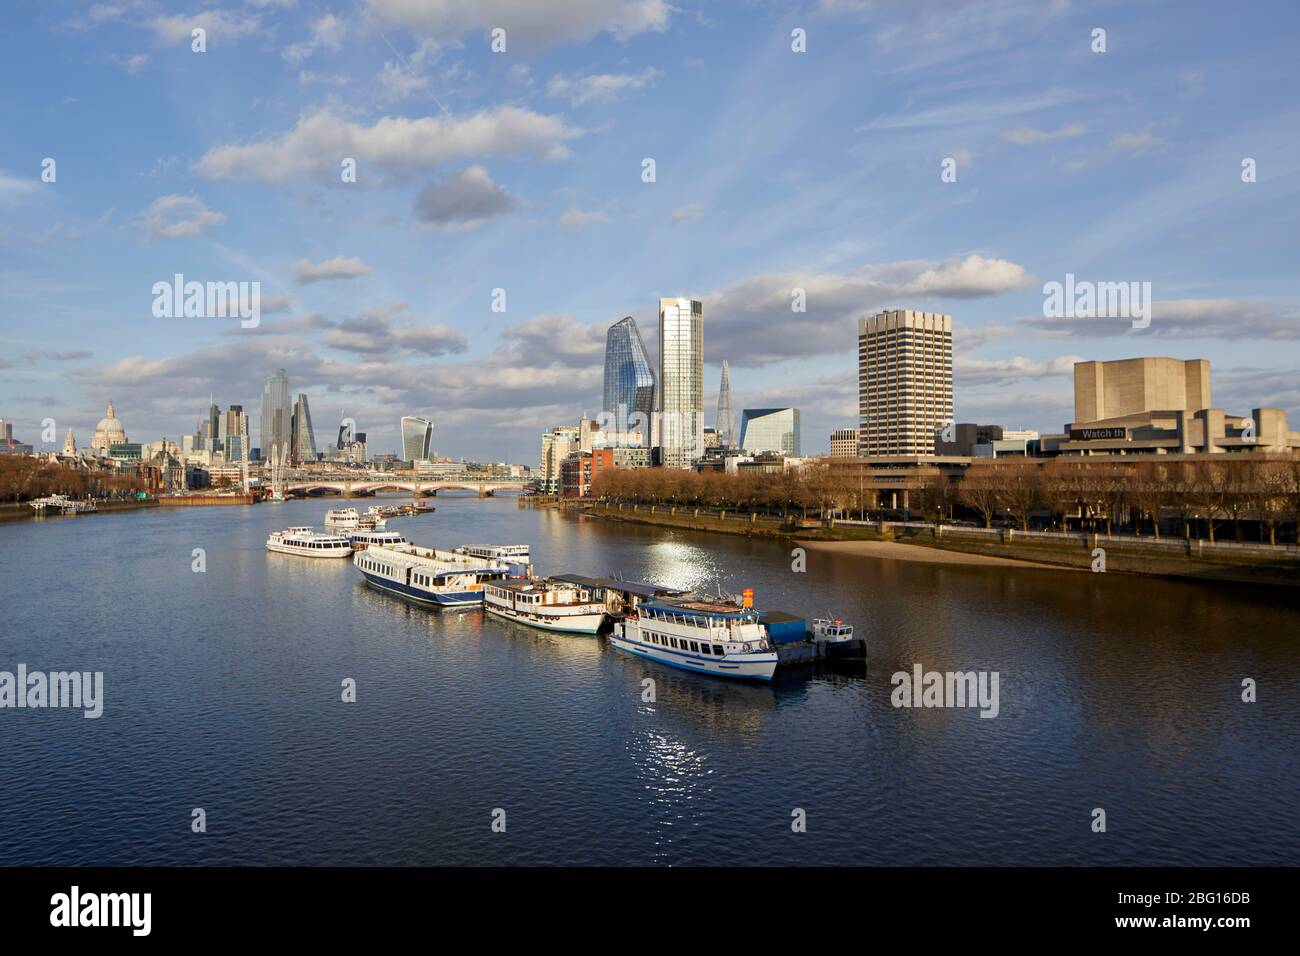 Springtime view of River Thames with the City of London and moored pleasure boats during restricted travel of Coronavirus COVID-19 Lockdown in London Stock Photo